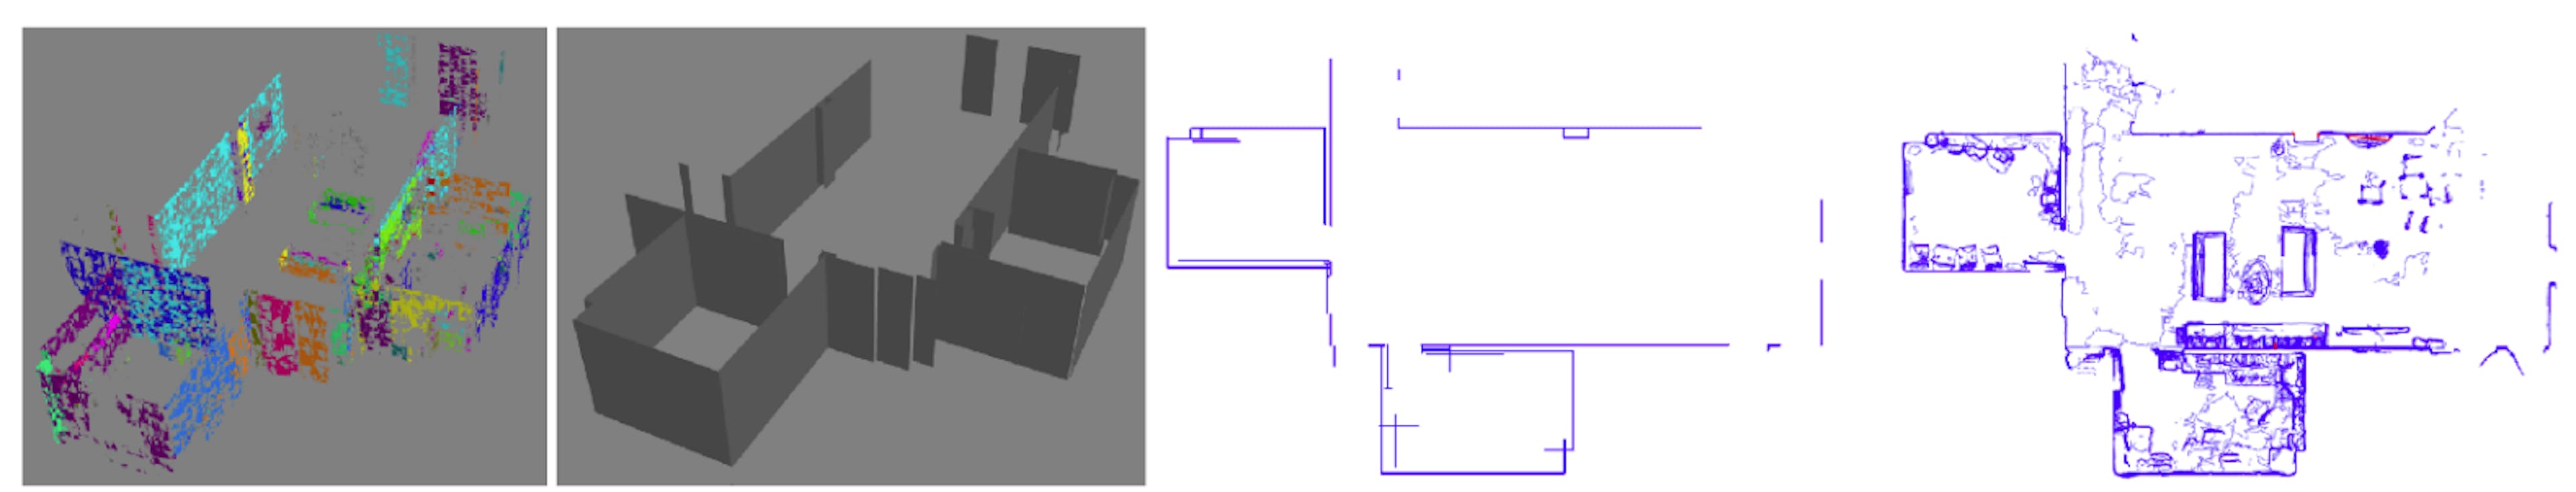 Fig. 13. First: DBSCAN clustering results for building B2. Second: plane-fitted flat walls. Third: drafting-style floor plan. Fourth: pen-and-ink style floor plan.